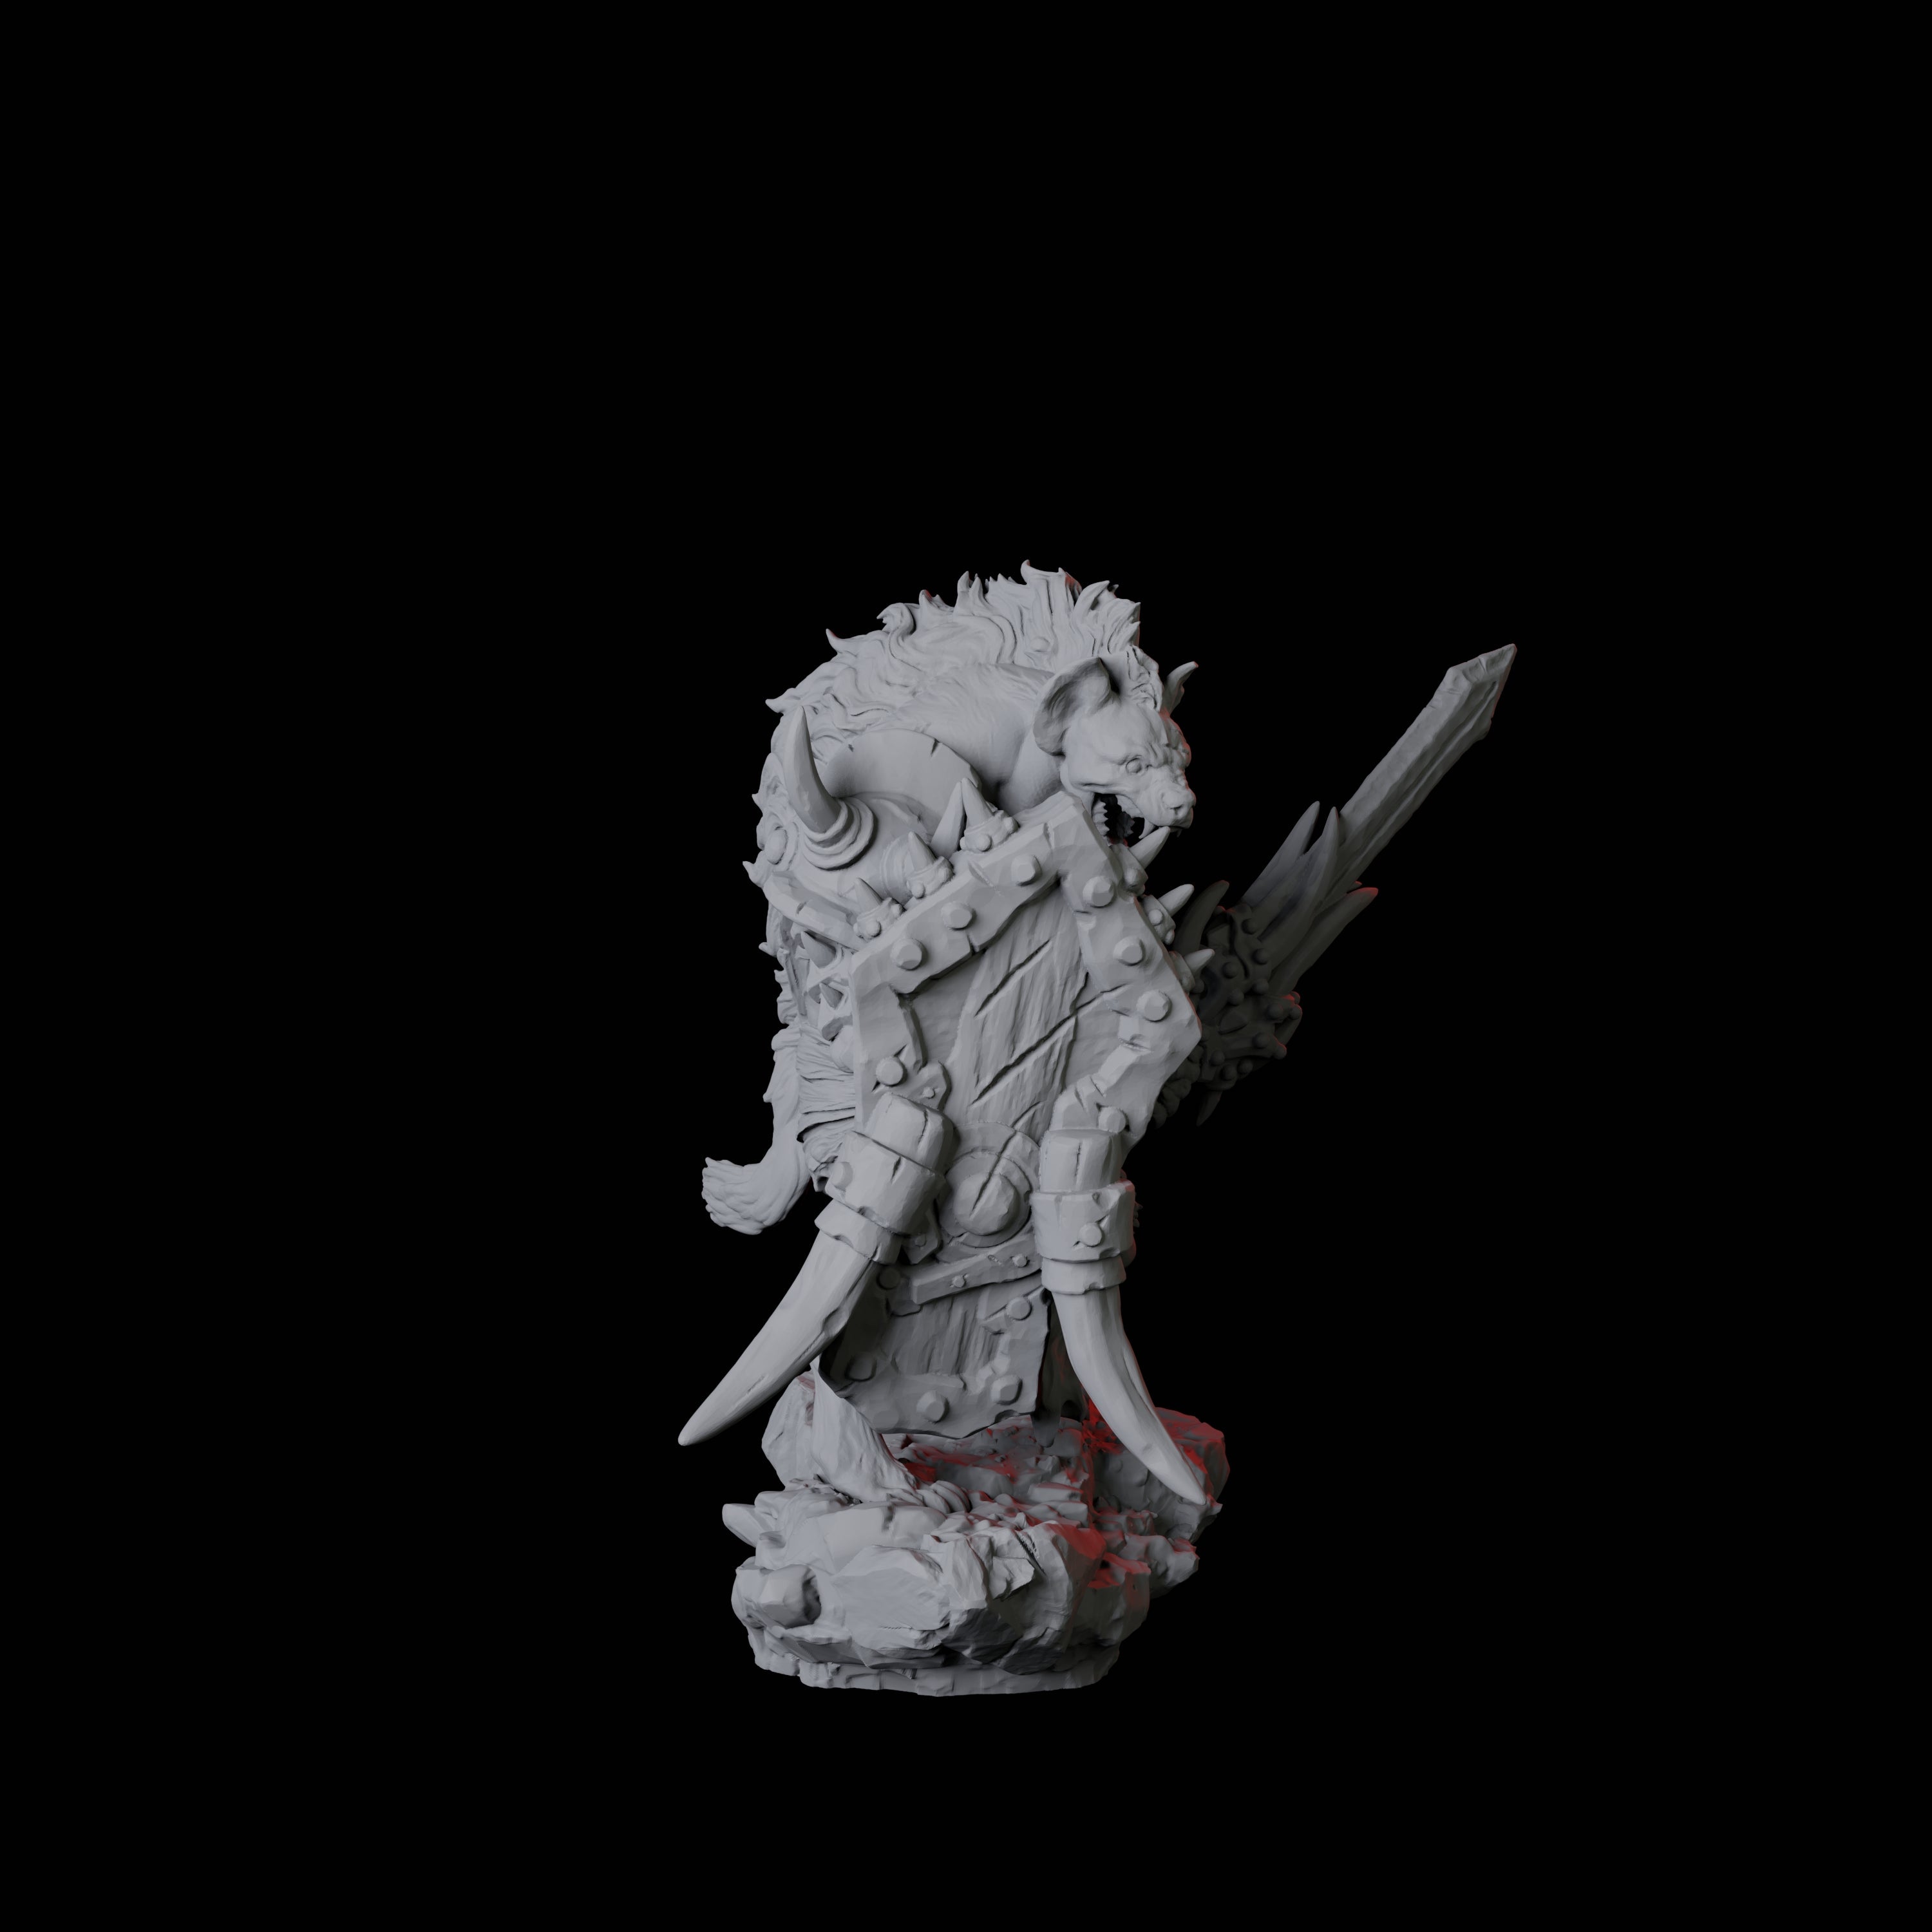 Gnoll Scout B Miniature for Dungeons and Dragons, Pathfinder or other TTRPGs